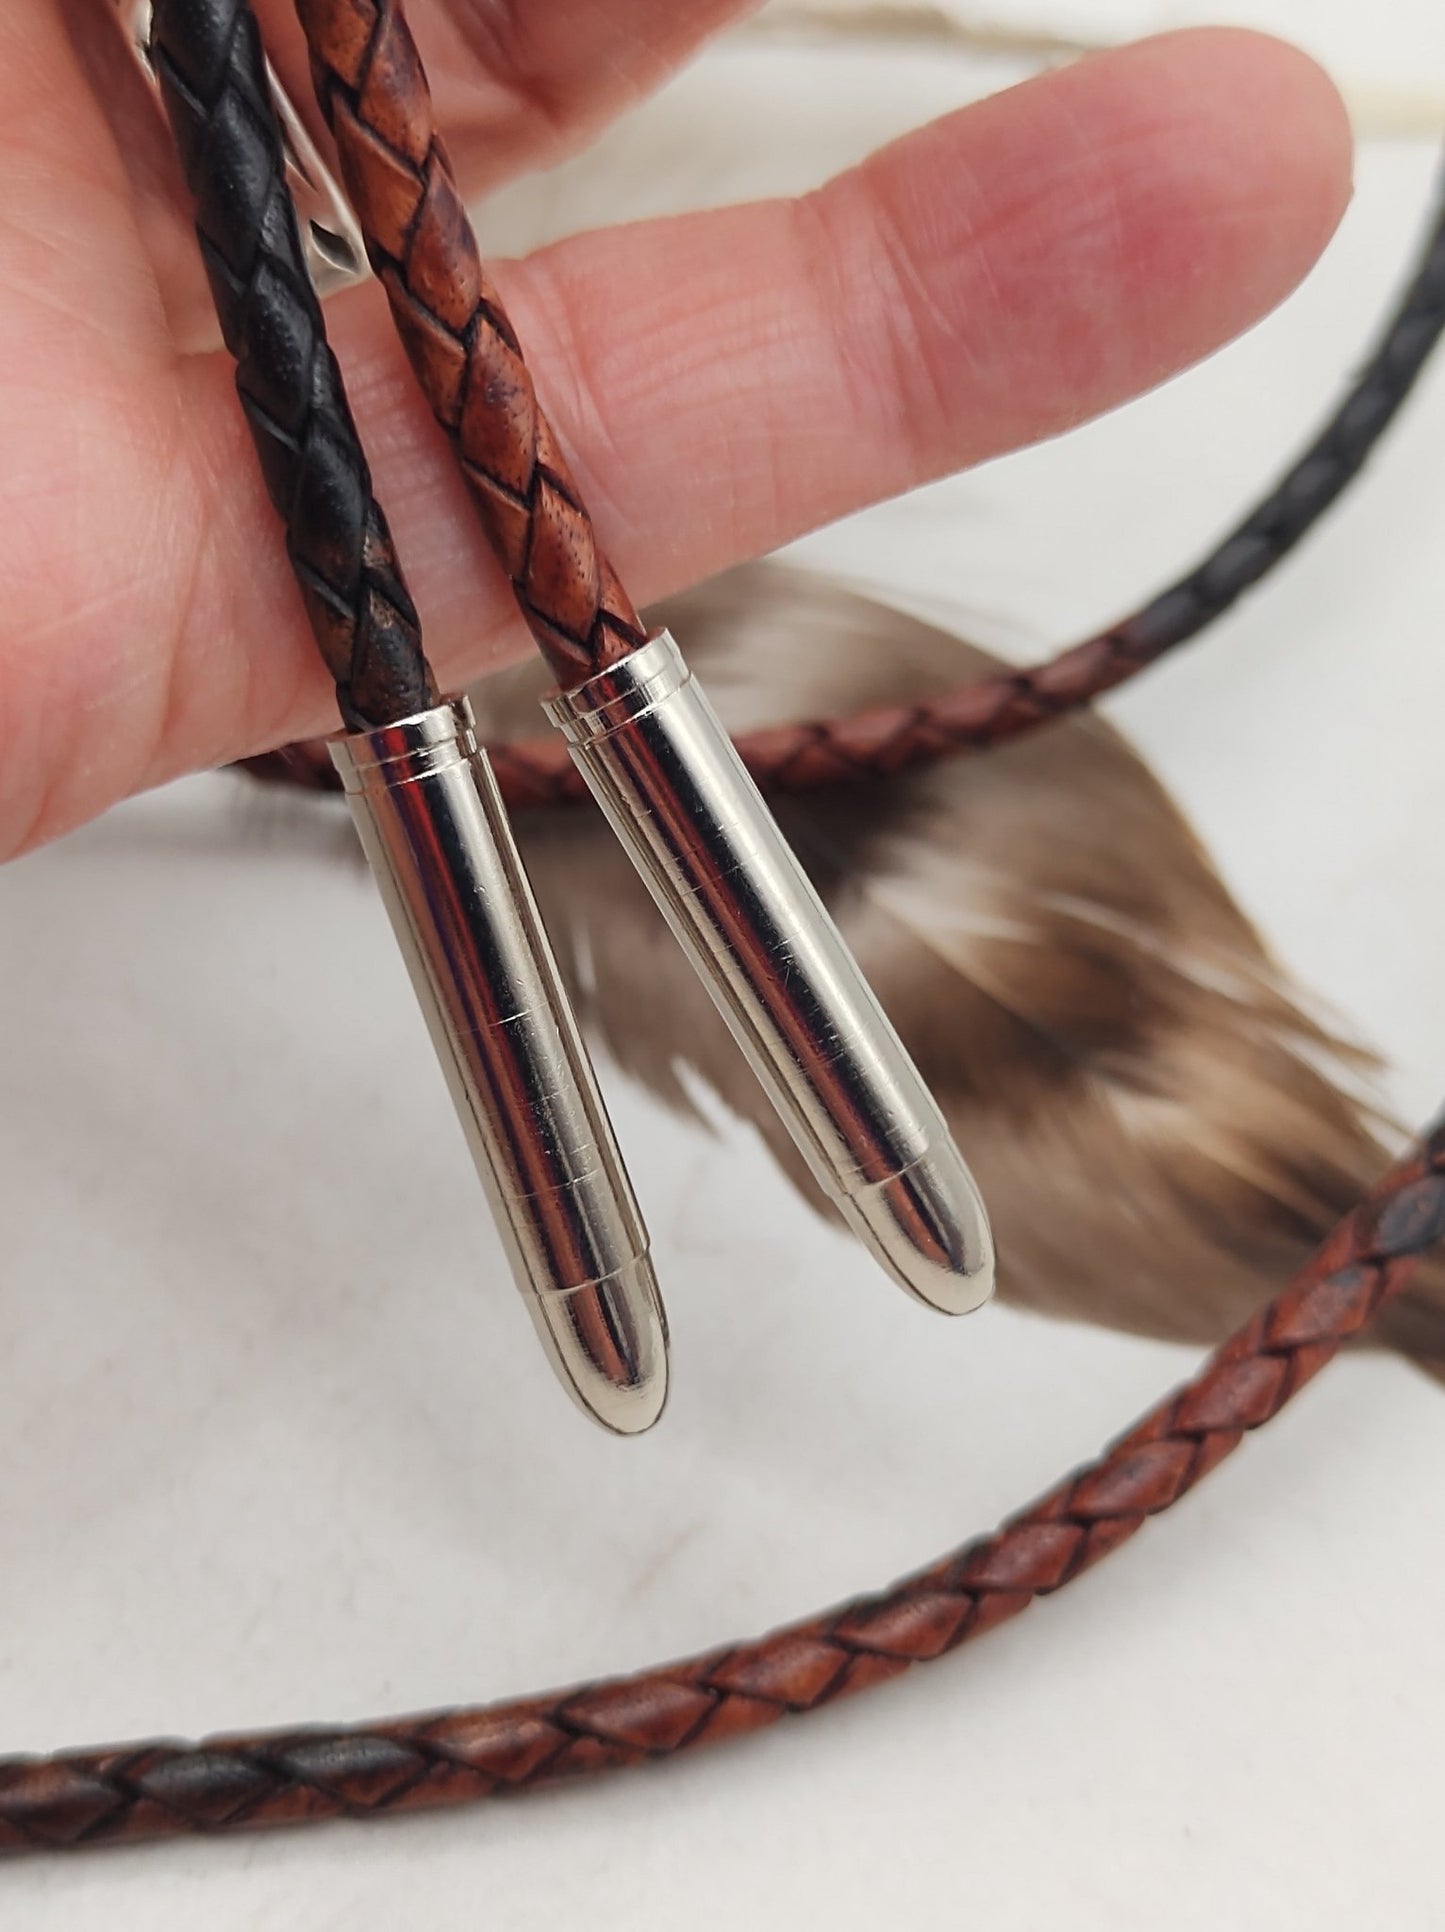 Rustic Agate Cowboy Bolo Tie with Montana Agate - Folks On The Edge